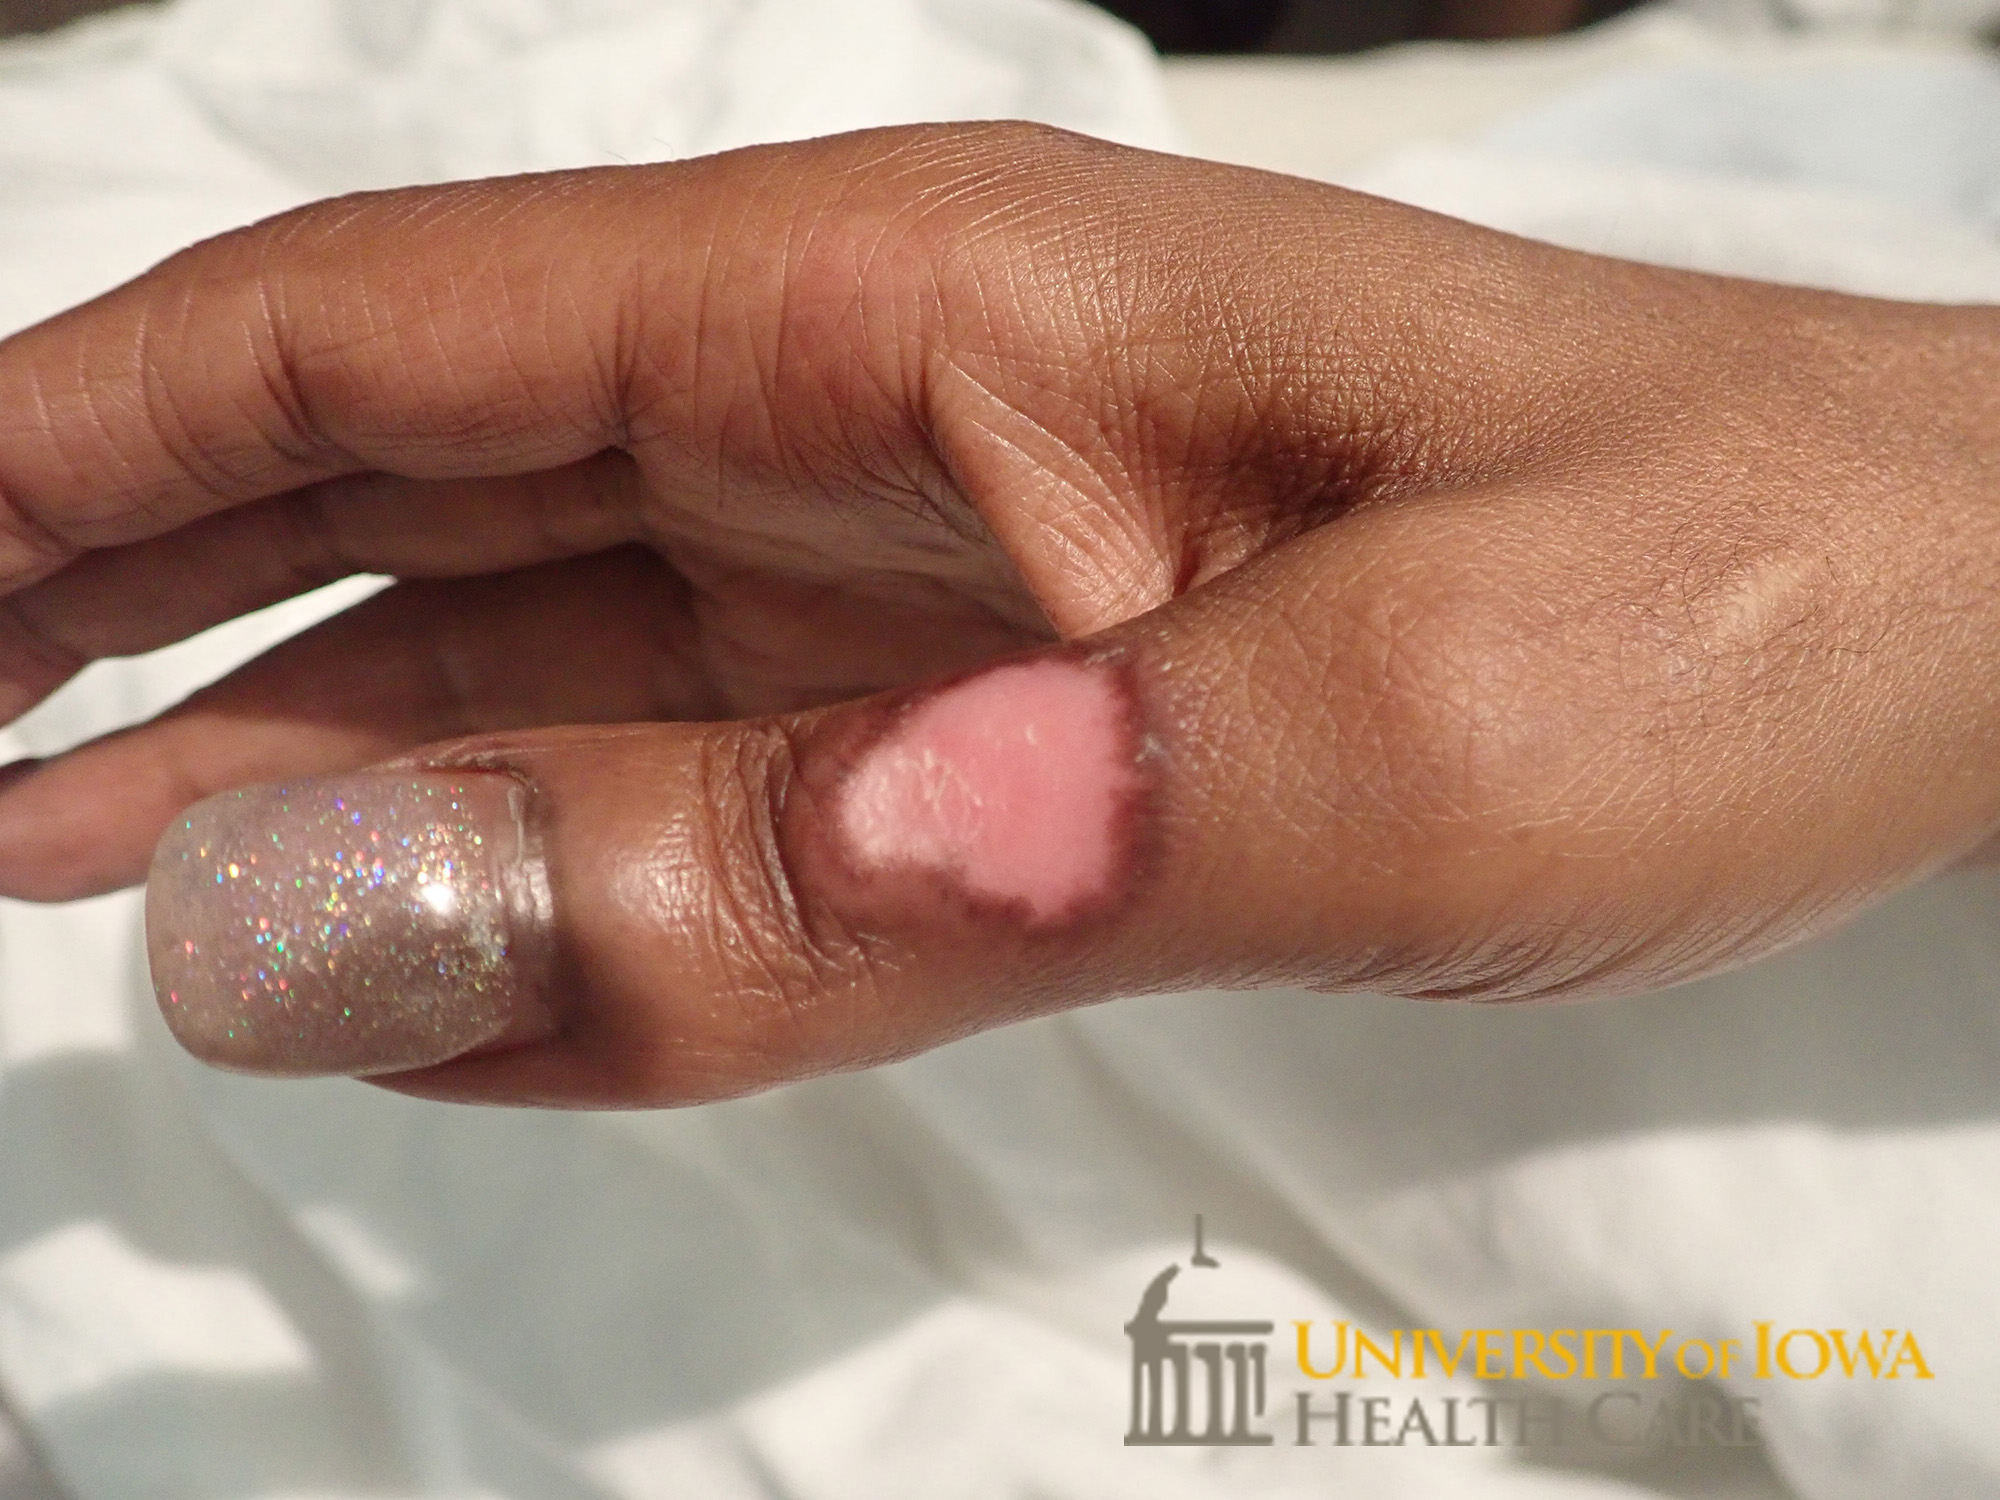 Well demaracated, shiny, and atrophic plaque with central depigmentation and with rim of hyperpigmentation and central scale on the thumb. (click images for higher resolution).